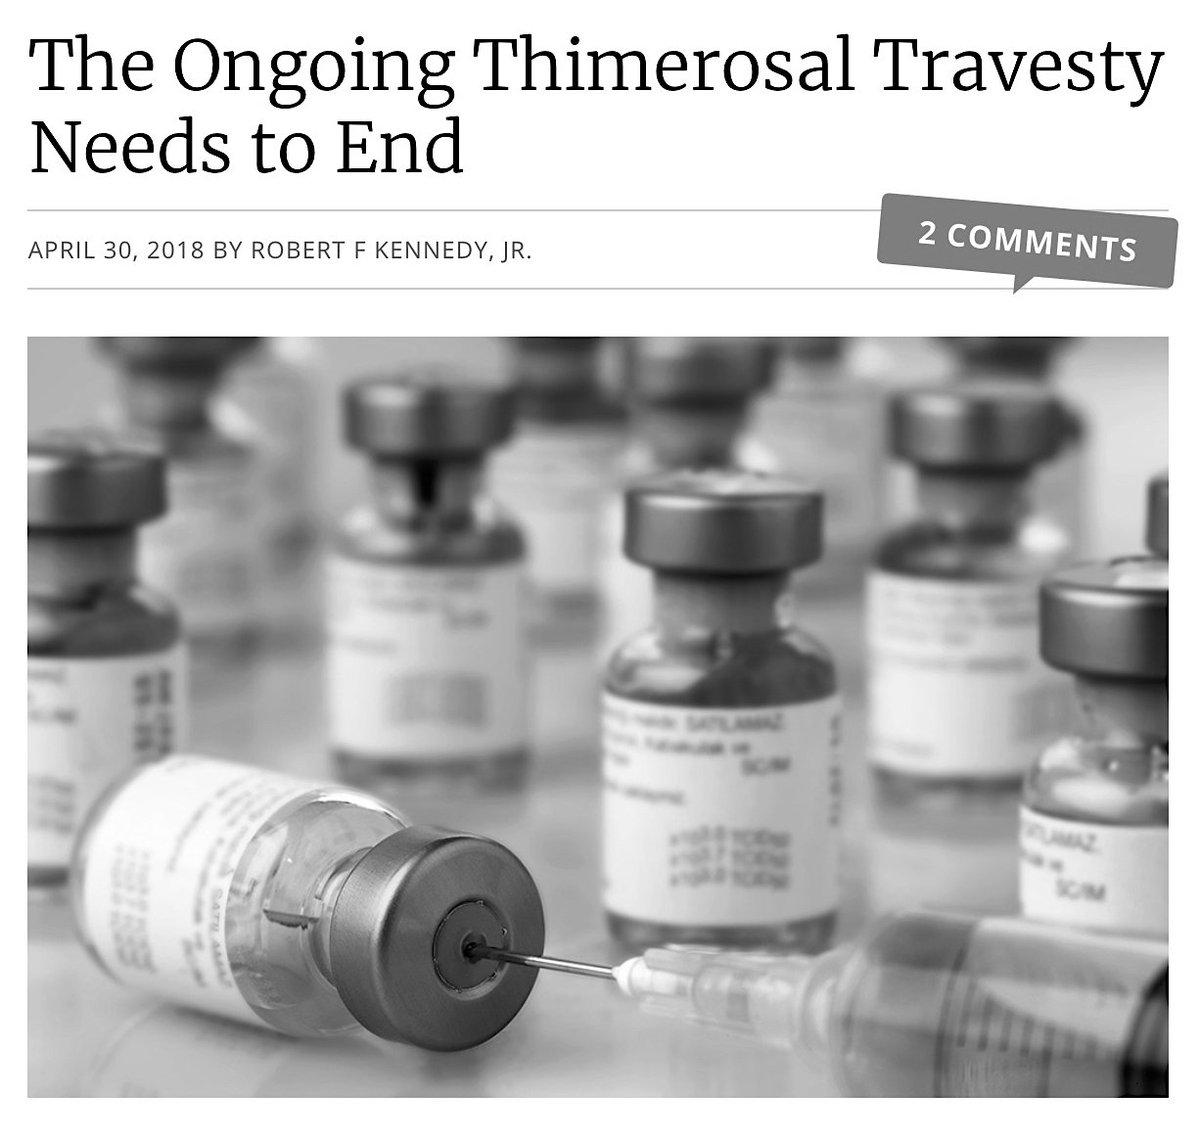 Thimerosal Is The Infamous Mercury-Containing Preservative In Use, To This Day, In Some Vaccines And Also In Dozens Of Other Pharmaceutical Products Approved By The FDA.By Robert F. Kennedy, April 30, 2018 https://www.westonaprice.org/health-topics/environmental-toxins/the-ongoing-thimerosal-travesty-needs-to-end/Hat Tip  @Land_of_brave #QAnon  #Vaccine  @potus